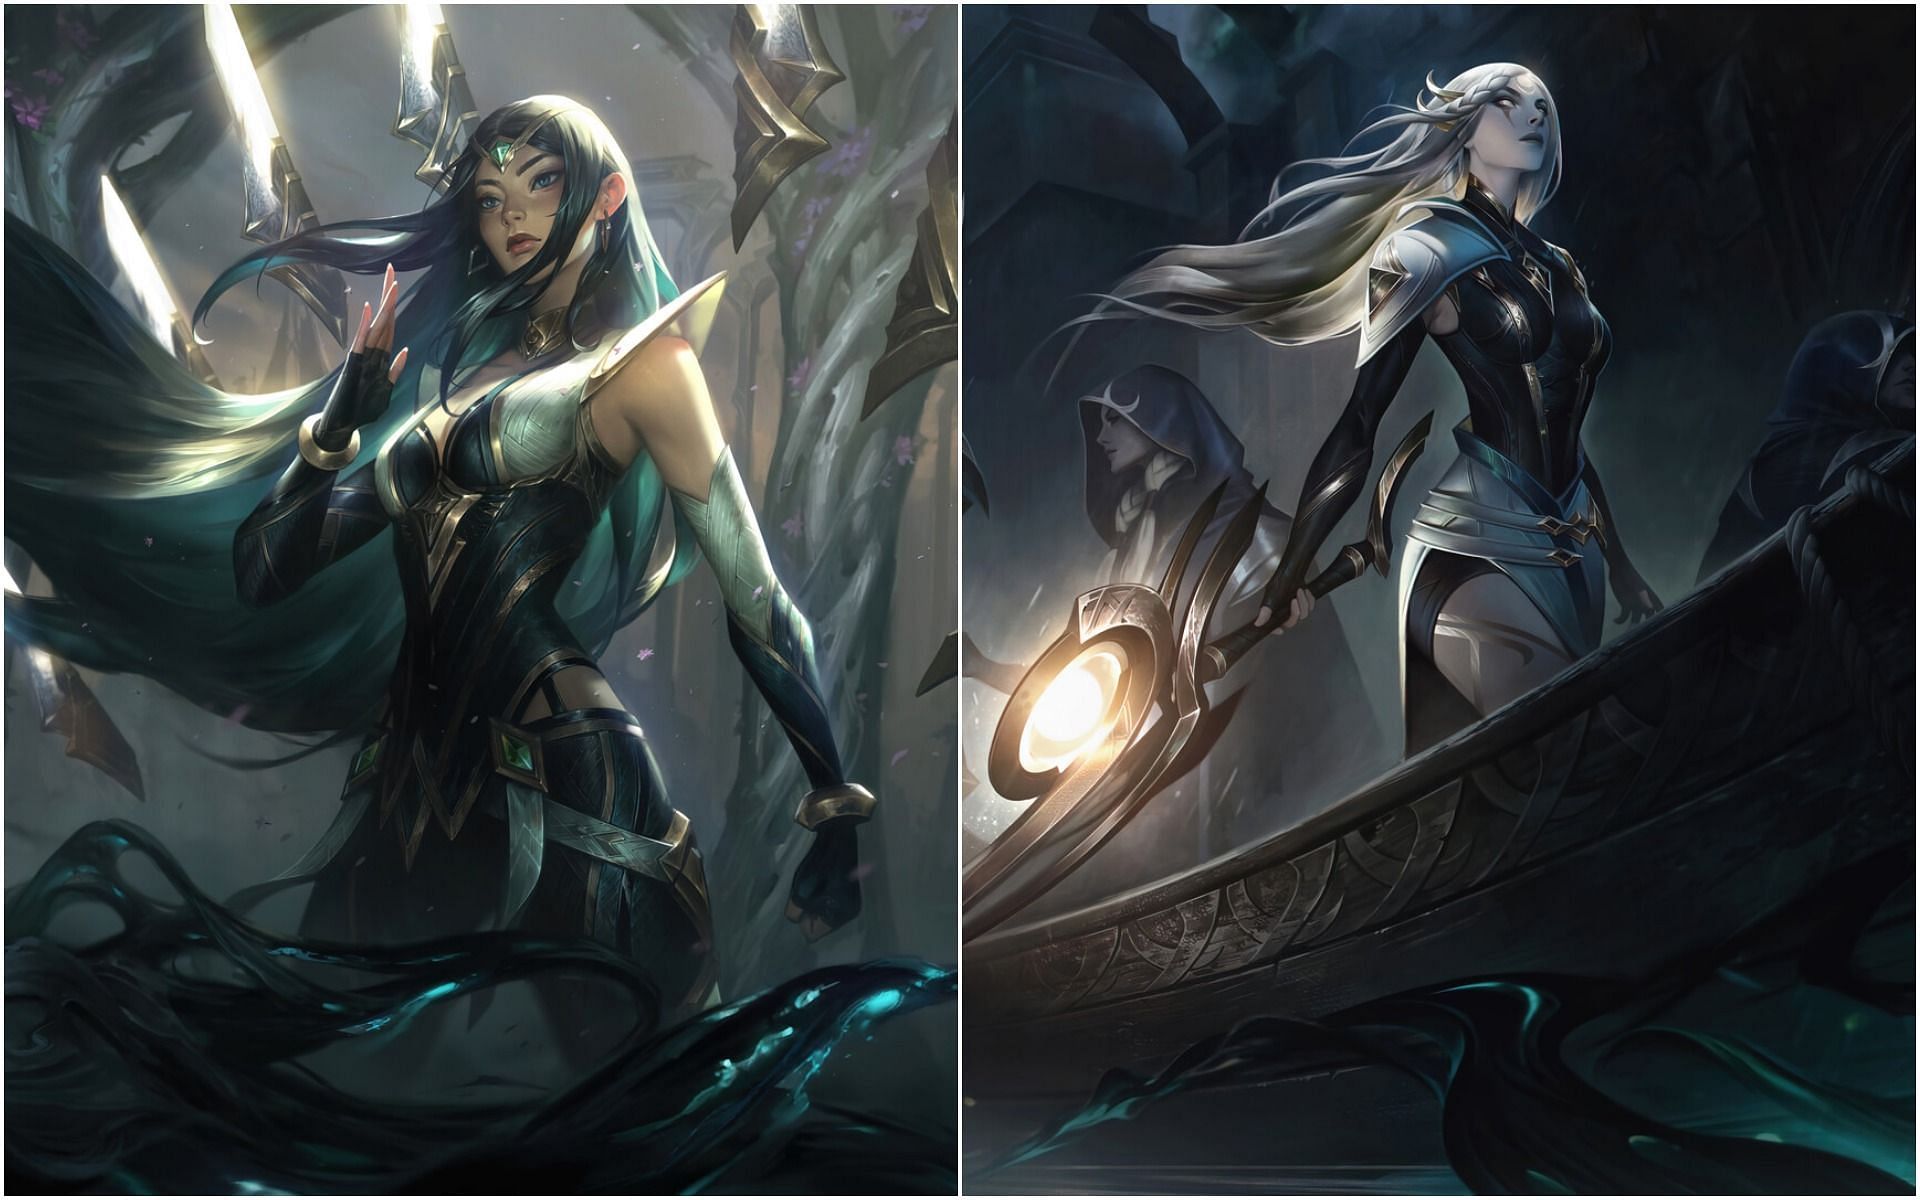 League of Legends Skin sale: Price featured champions and more. www.sportsk...